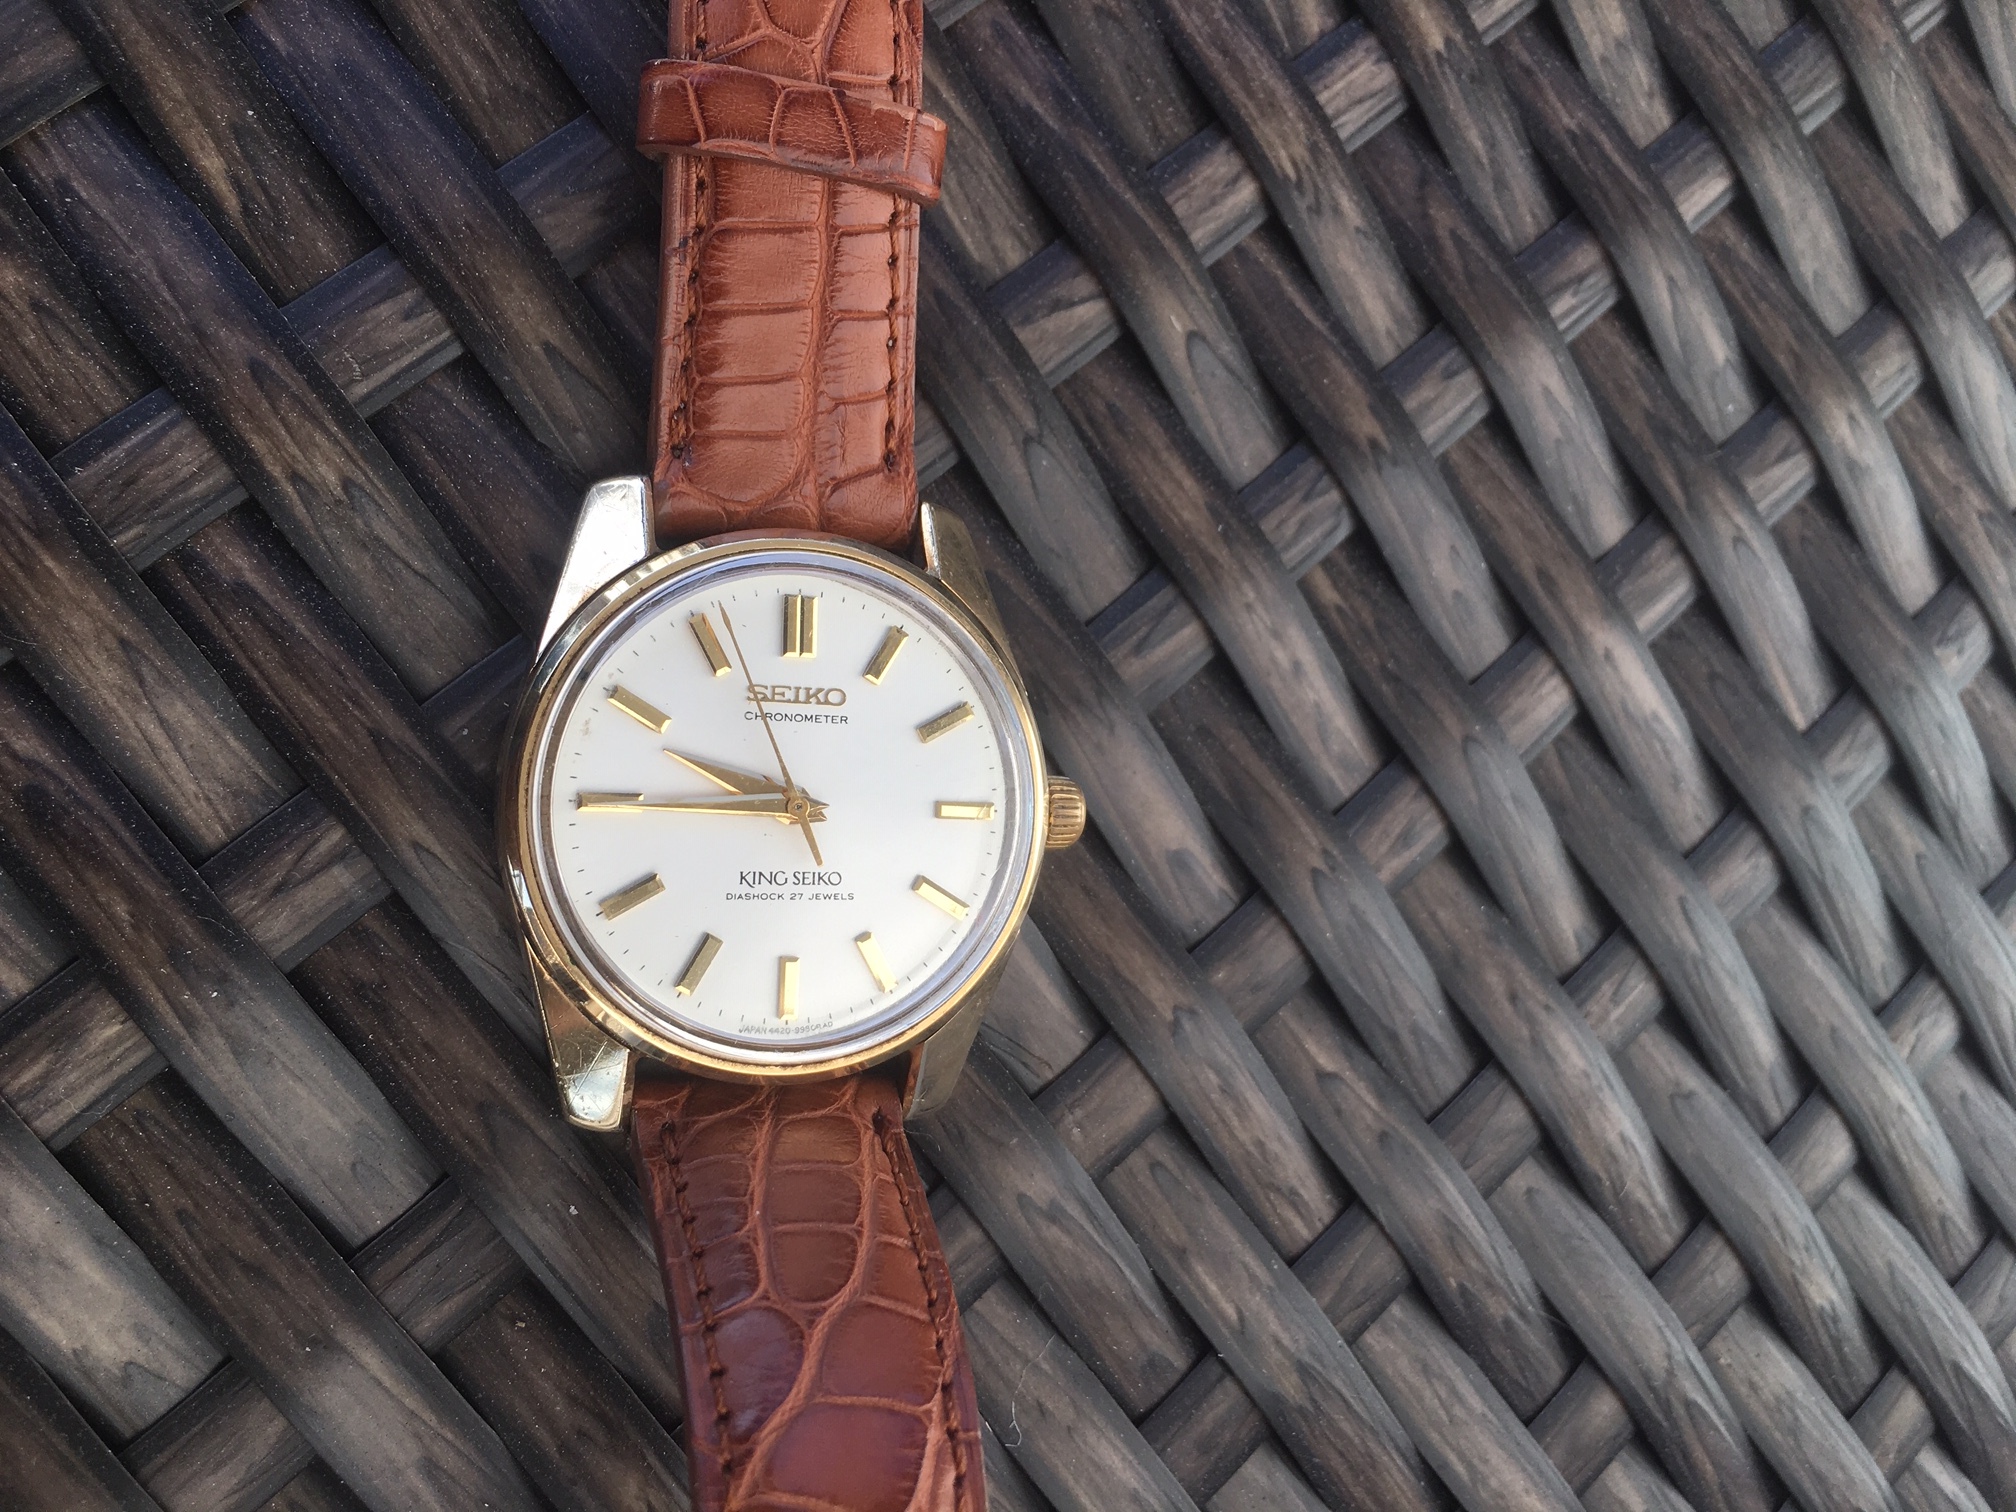 SOLD - REDUCED 1966 Gold Cap King Seiko 4420-9990 Chronometer | Omega Forums